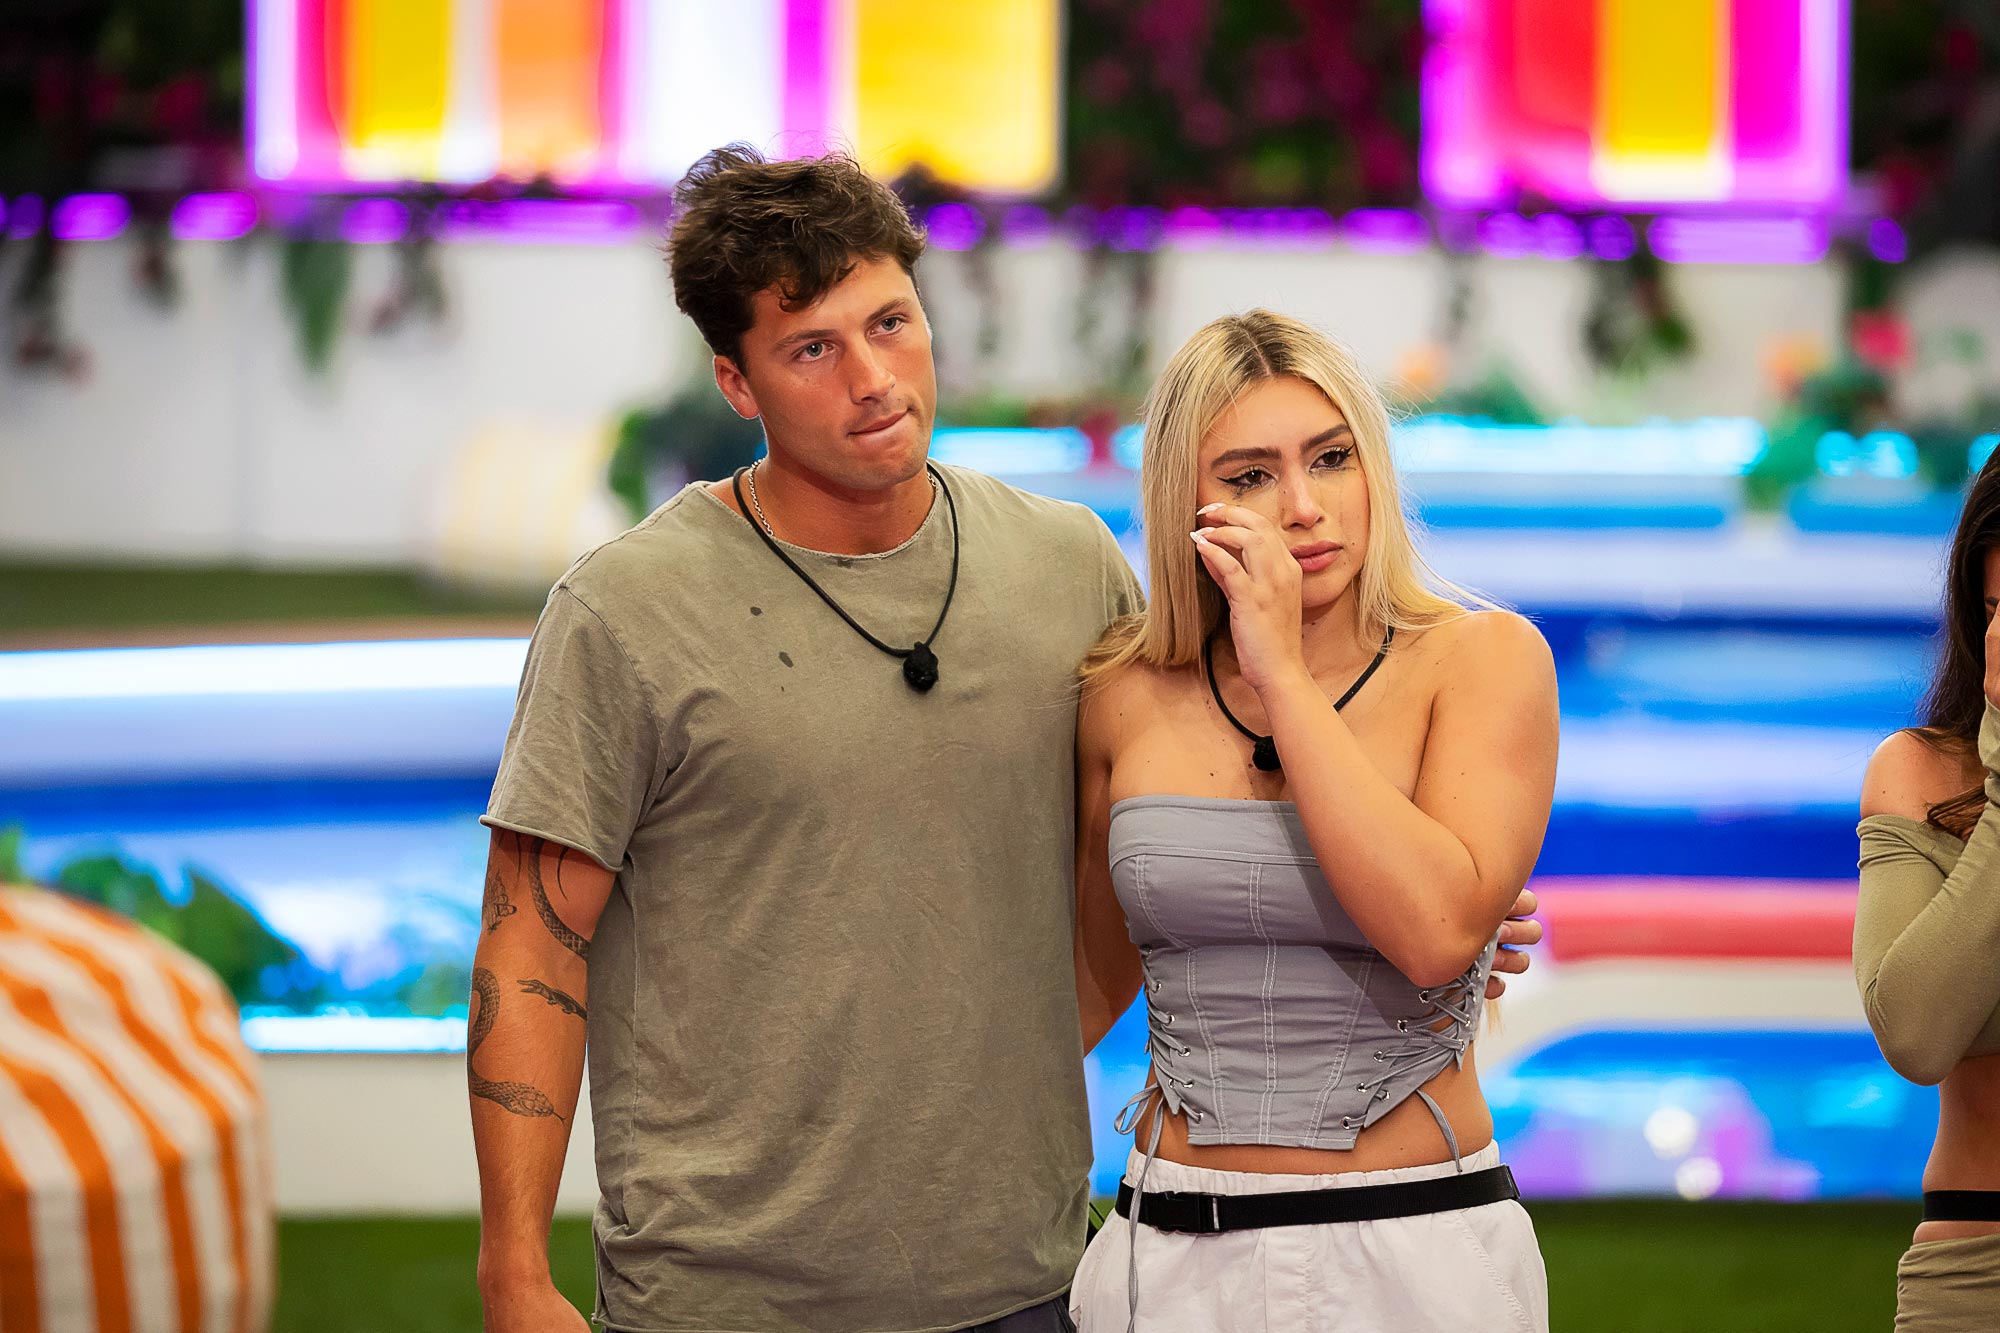 Most Dramatic Casa Amor Moments From ‘Love Island UK’ and ‘Love Island USA’